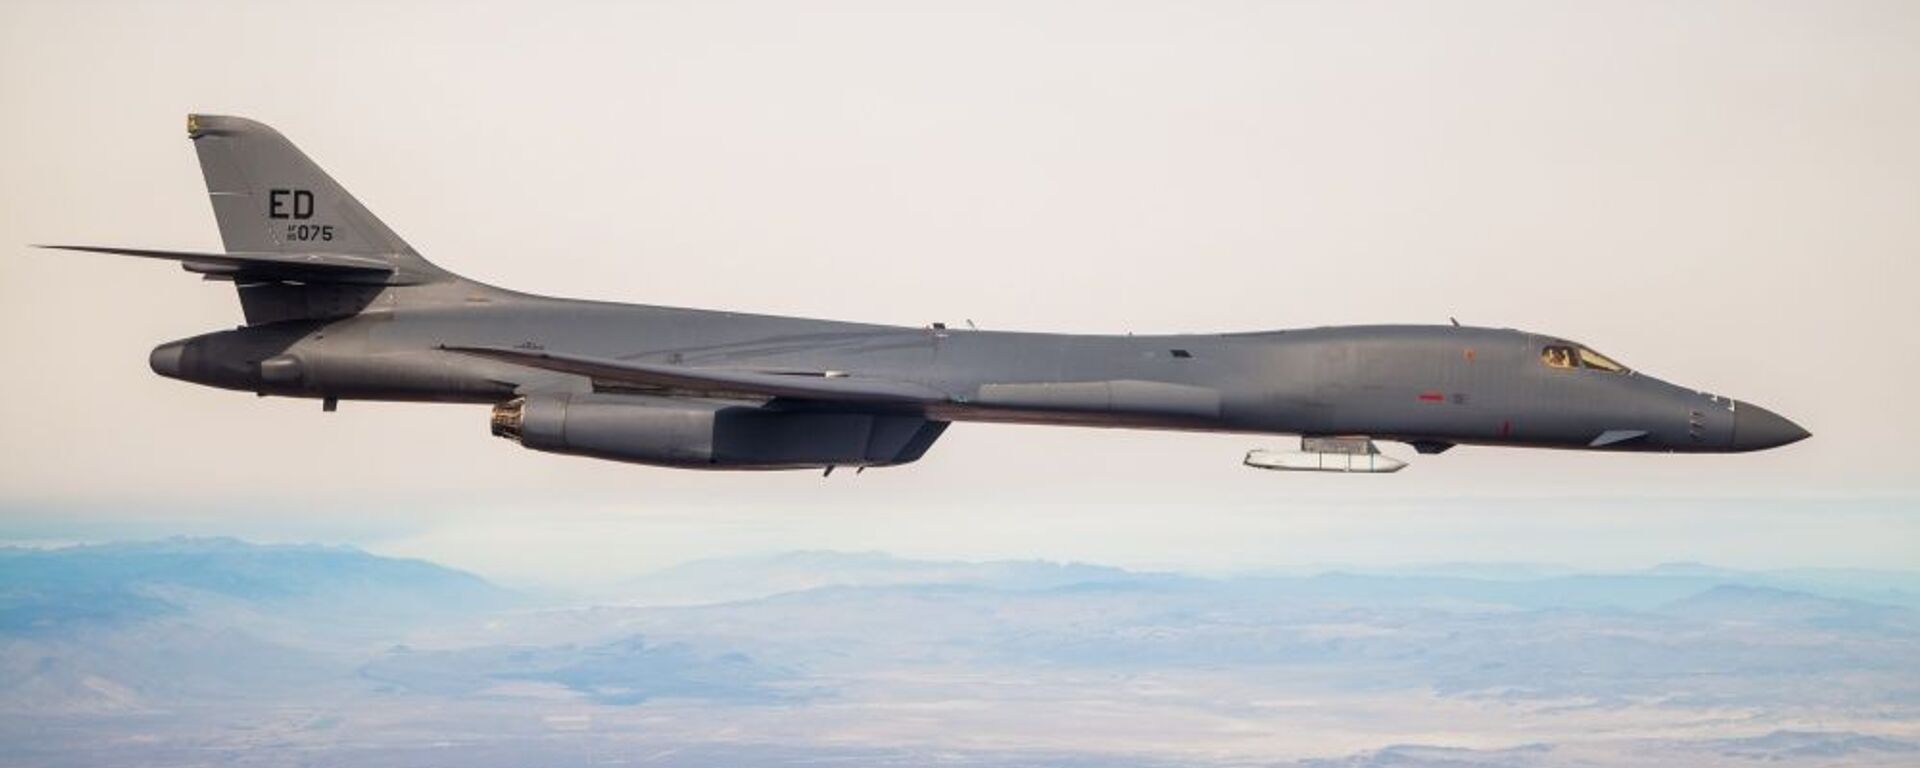 A B-1B Lancer with a Joint Air-to-Surface Standoff Missile (JASSM) flies in the skies above Edwards Air Force Base, California, Nov. 20. The flight was a demonstration of the B-1B’s external weapons carriage capabilities. - Sputnik International, 1920, 28.05.2021